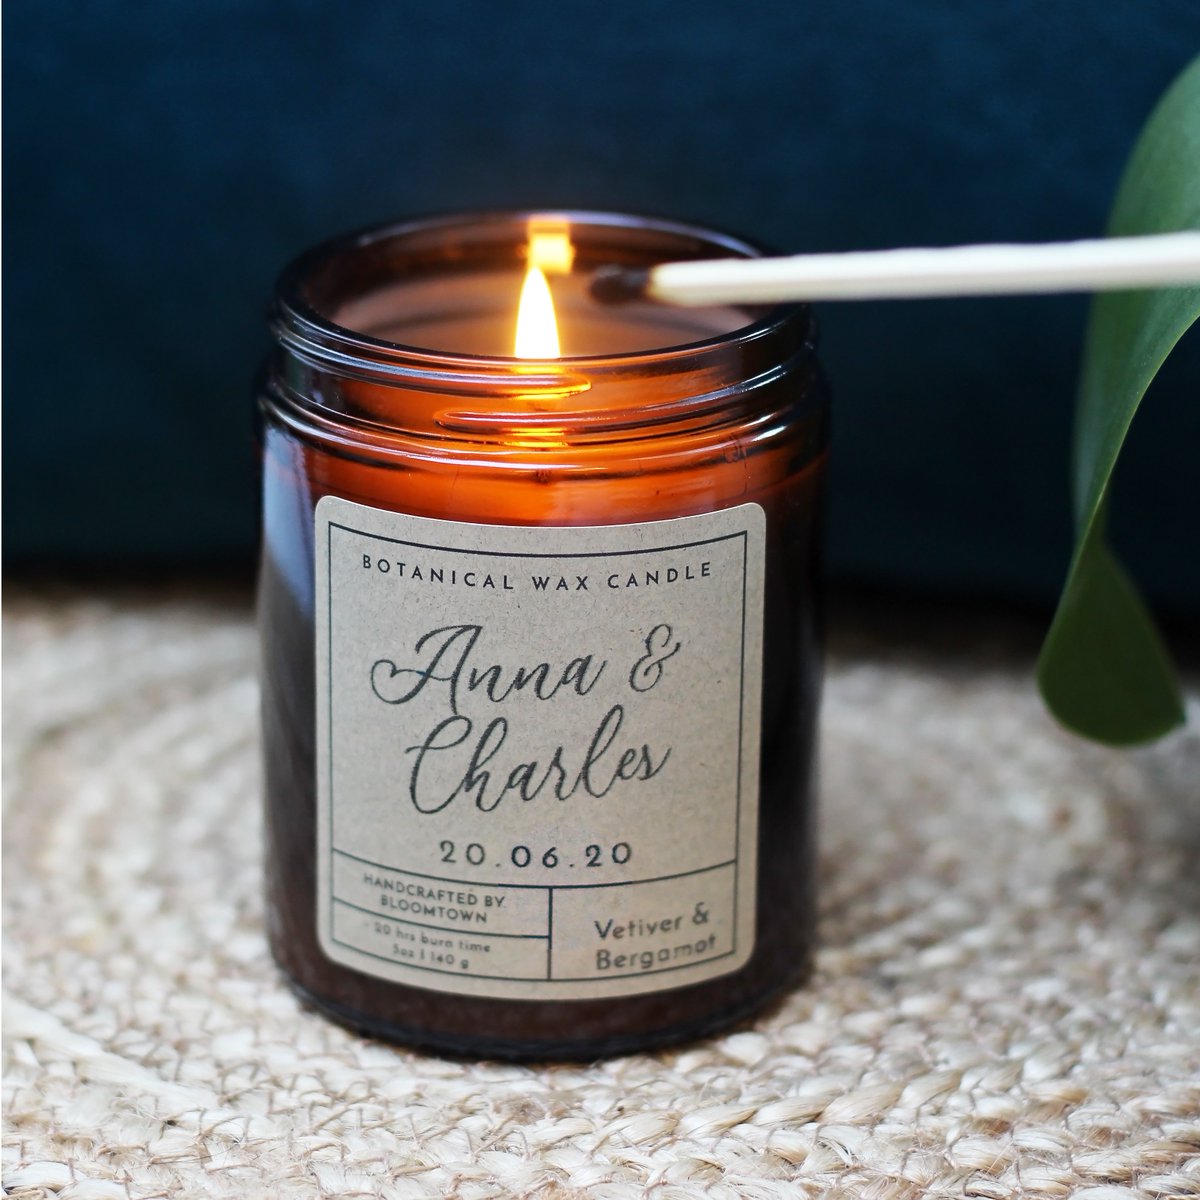 *Competition Time*
To celebrate the launch of our *new* Personalised Candles, available exclusively on notonthehighstreet, we're giving away two! Follow + RT to enter. Expires 27/10/19 11:59 pm bloomtown.co.uk/pages/giveaway… #FreebieFriday #Competition #GiveawayEntry